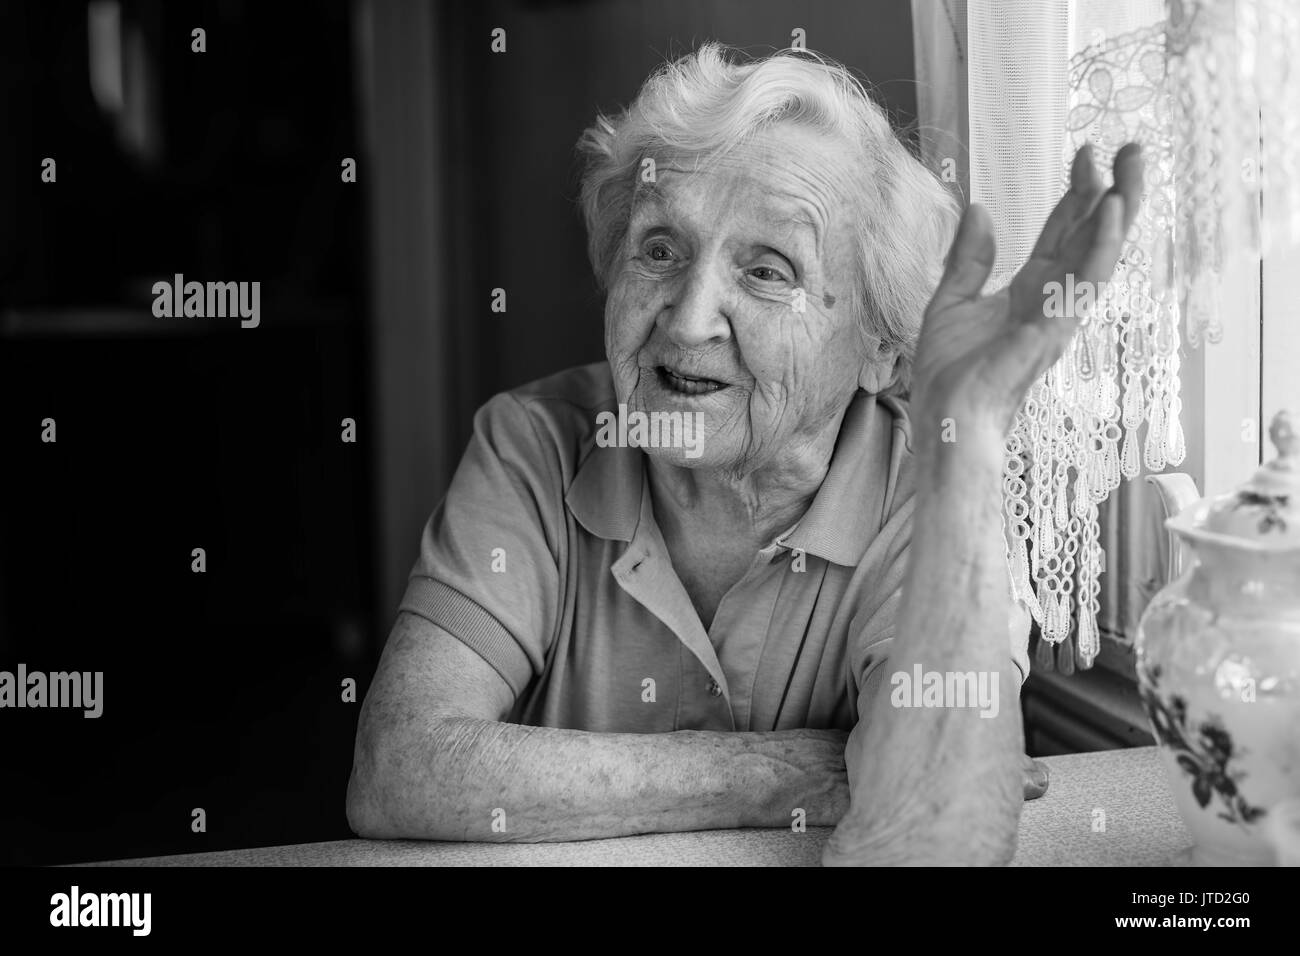 Black-and-white portrait of an elderly woman emotional says in her home. Stock Photo